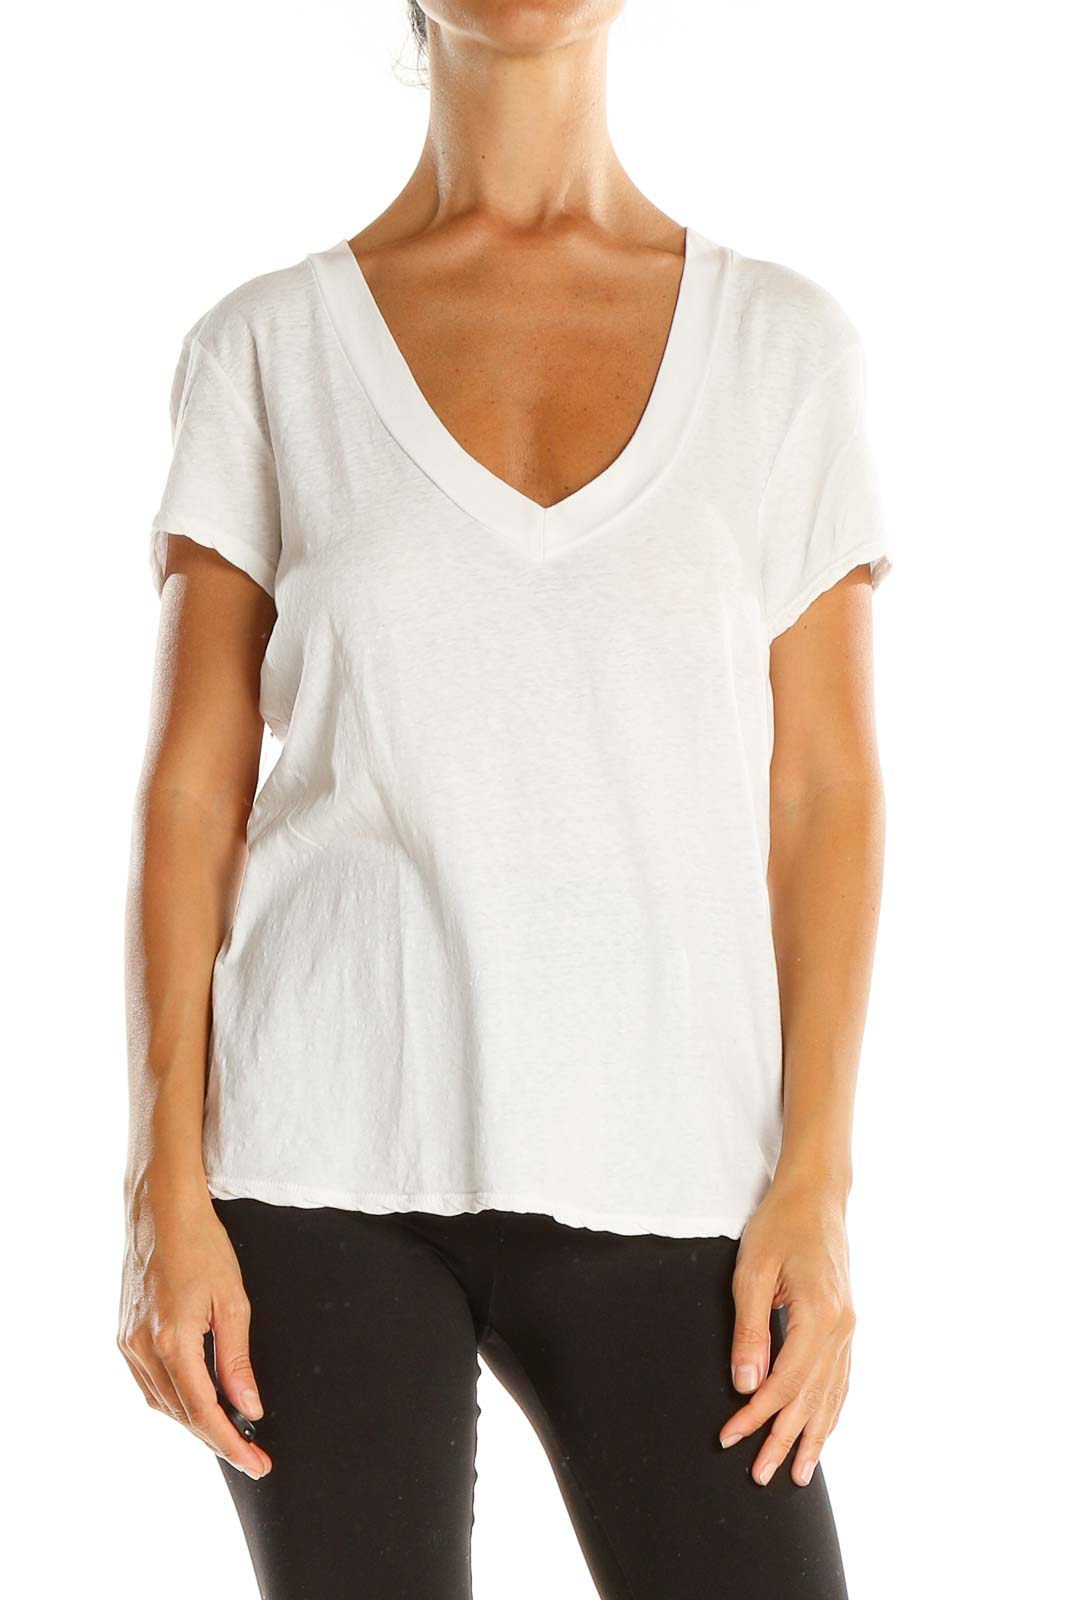 White Casual T-Shirt Front